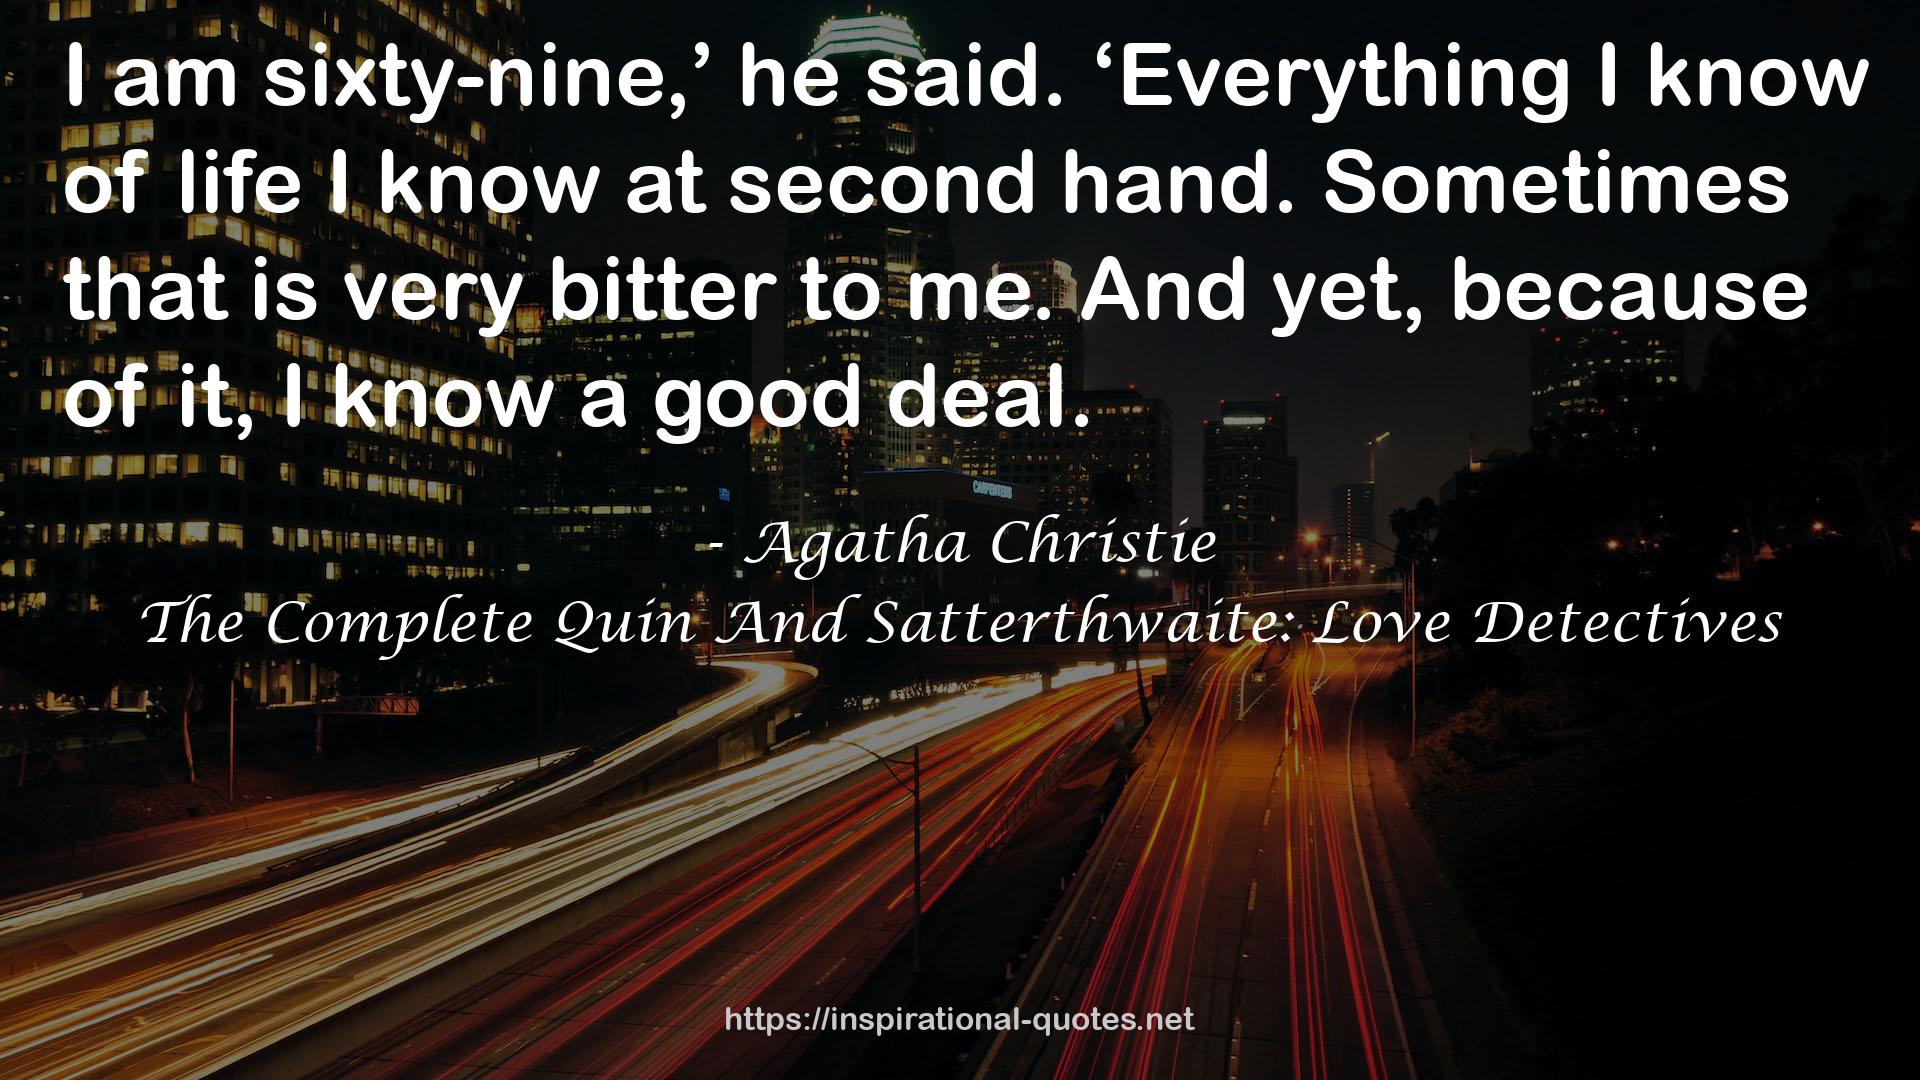 The Complete Quin And Satterthwaite: Love Detectives QUOTES